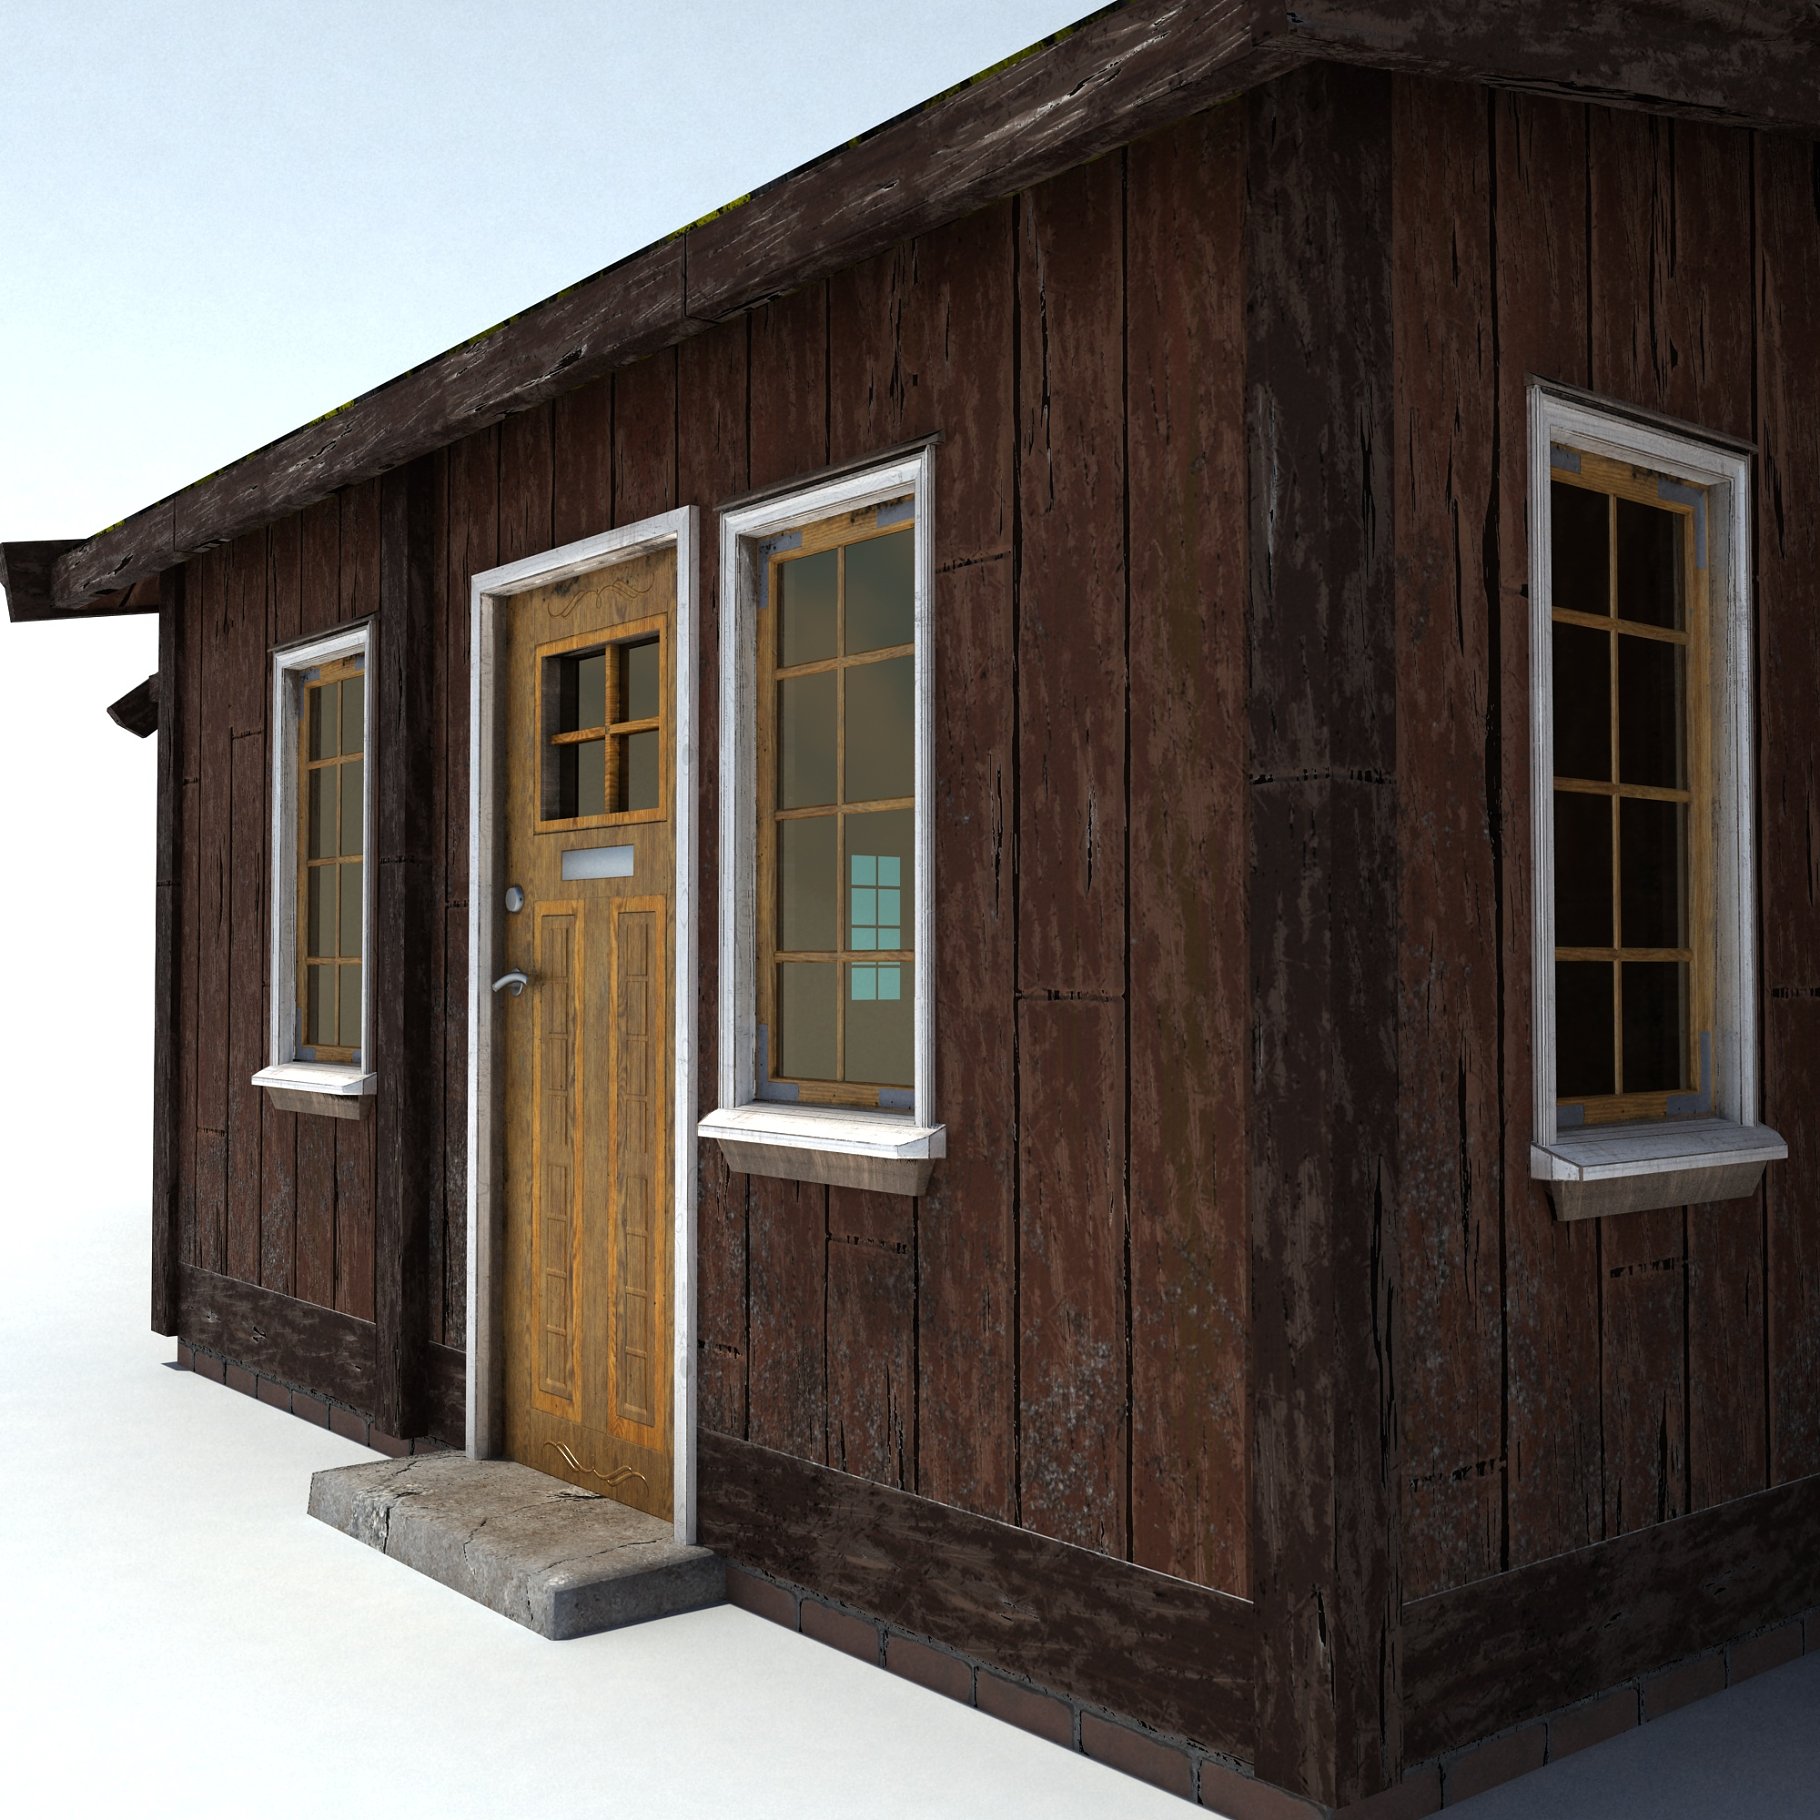 Old house low poly close-up mockup.